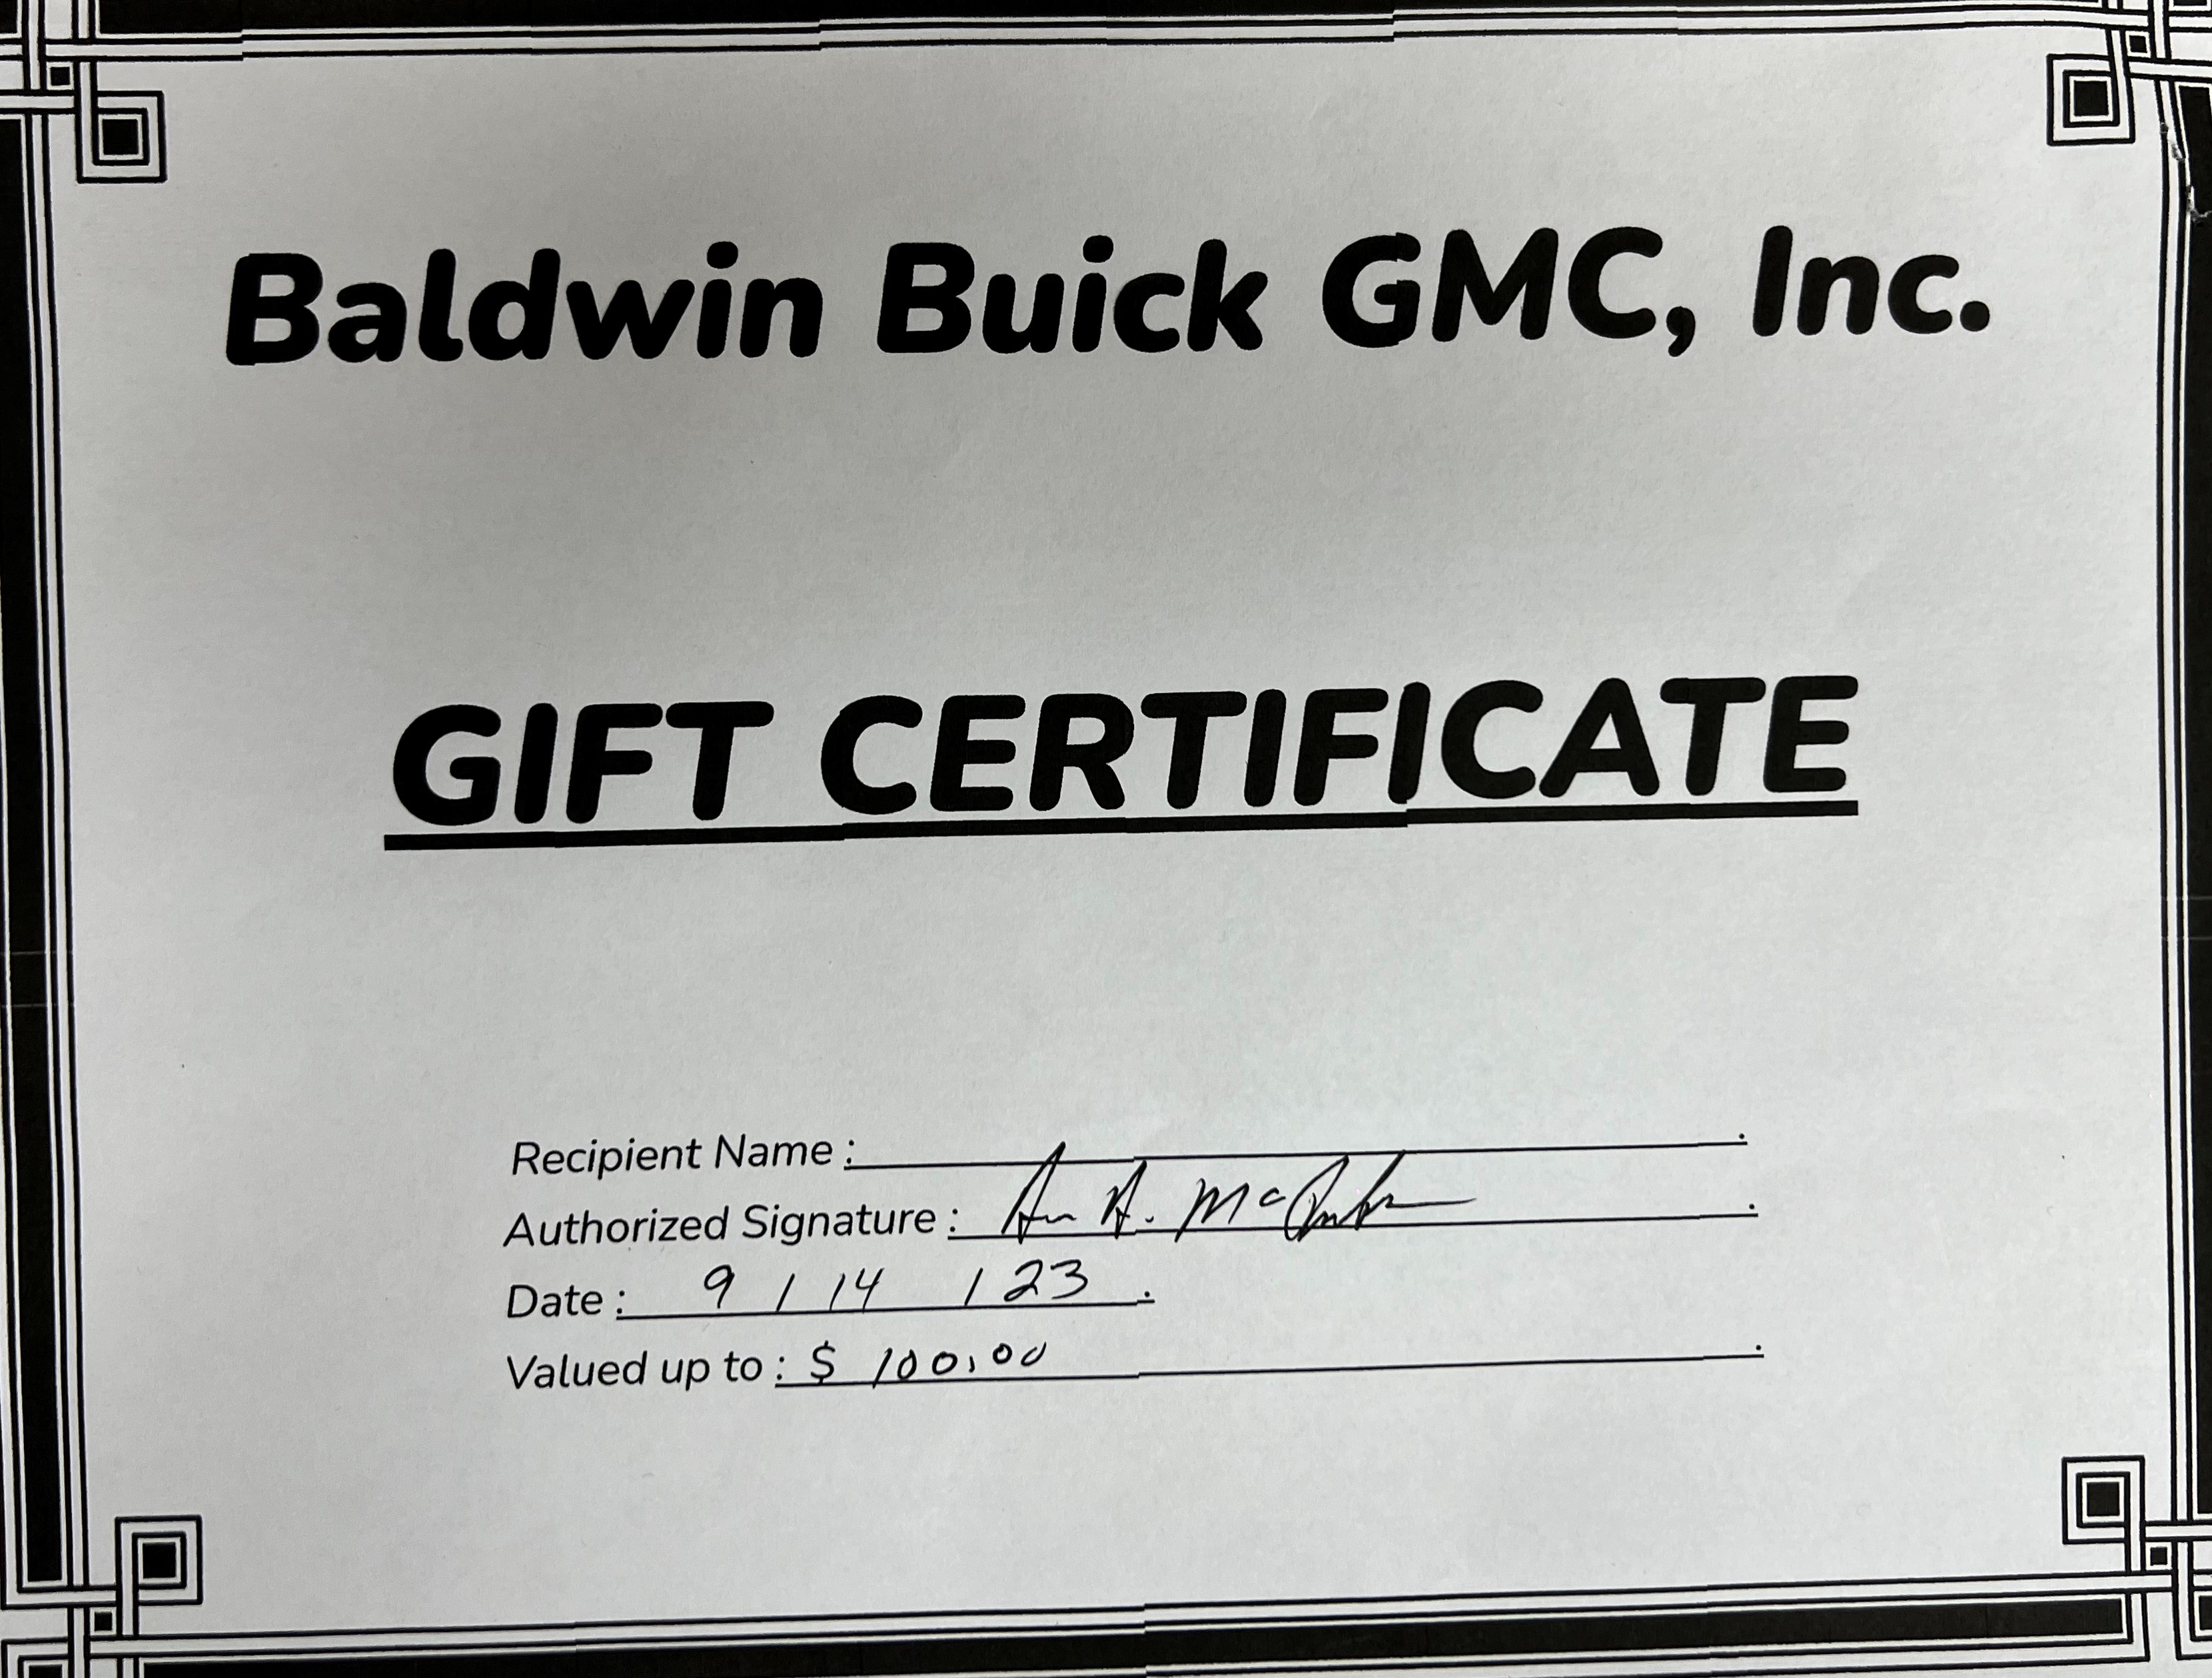 $100 Gift Certificate toward services